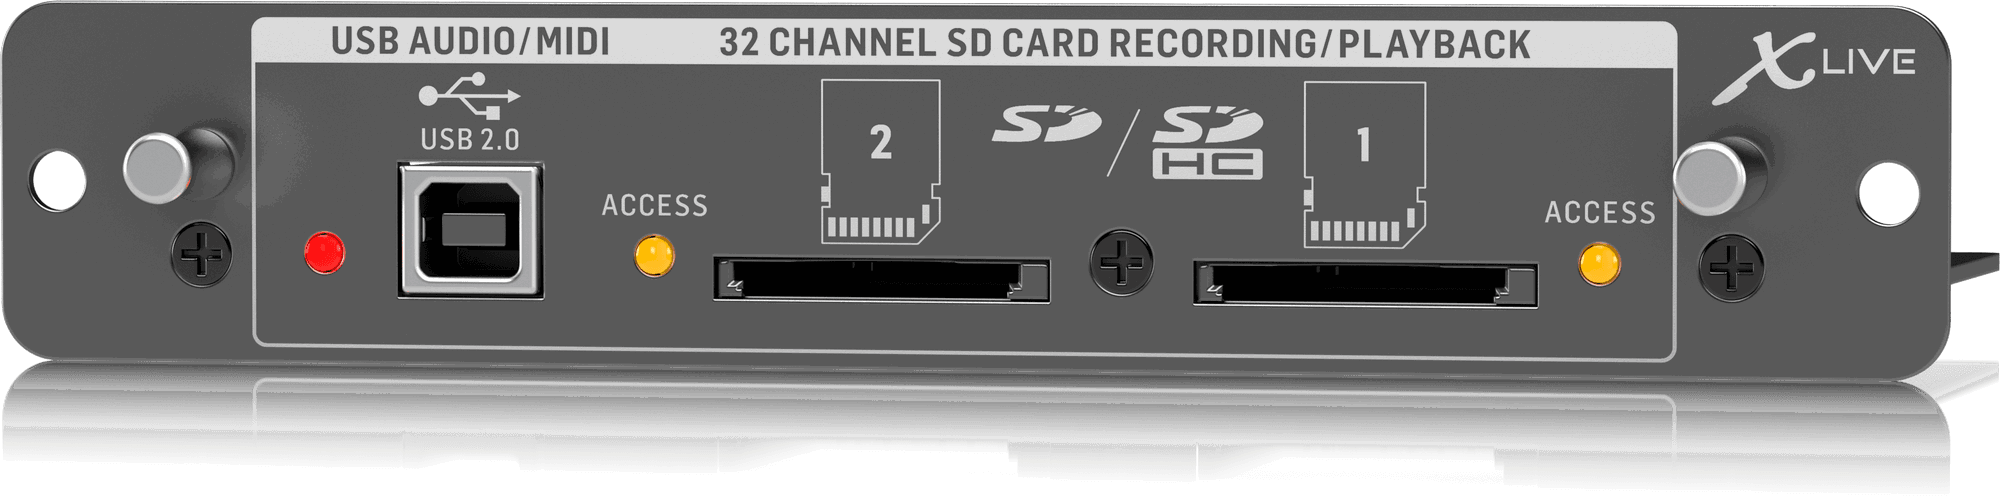 Behringer X-LIVE X32 Expansion Card for 32 Channel Live Recording/Playback on SD/SDHC Cards and USB Audio/MIDI Interface | BEHRINGER , Zoso Music